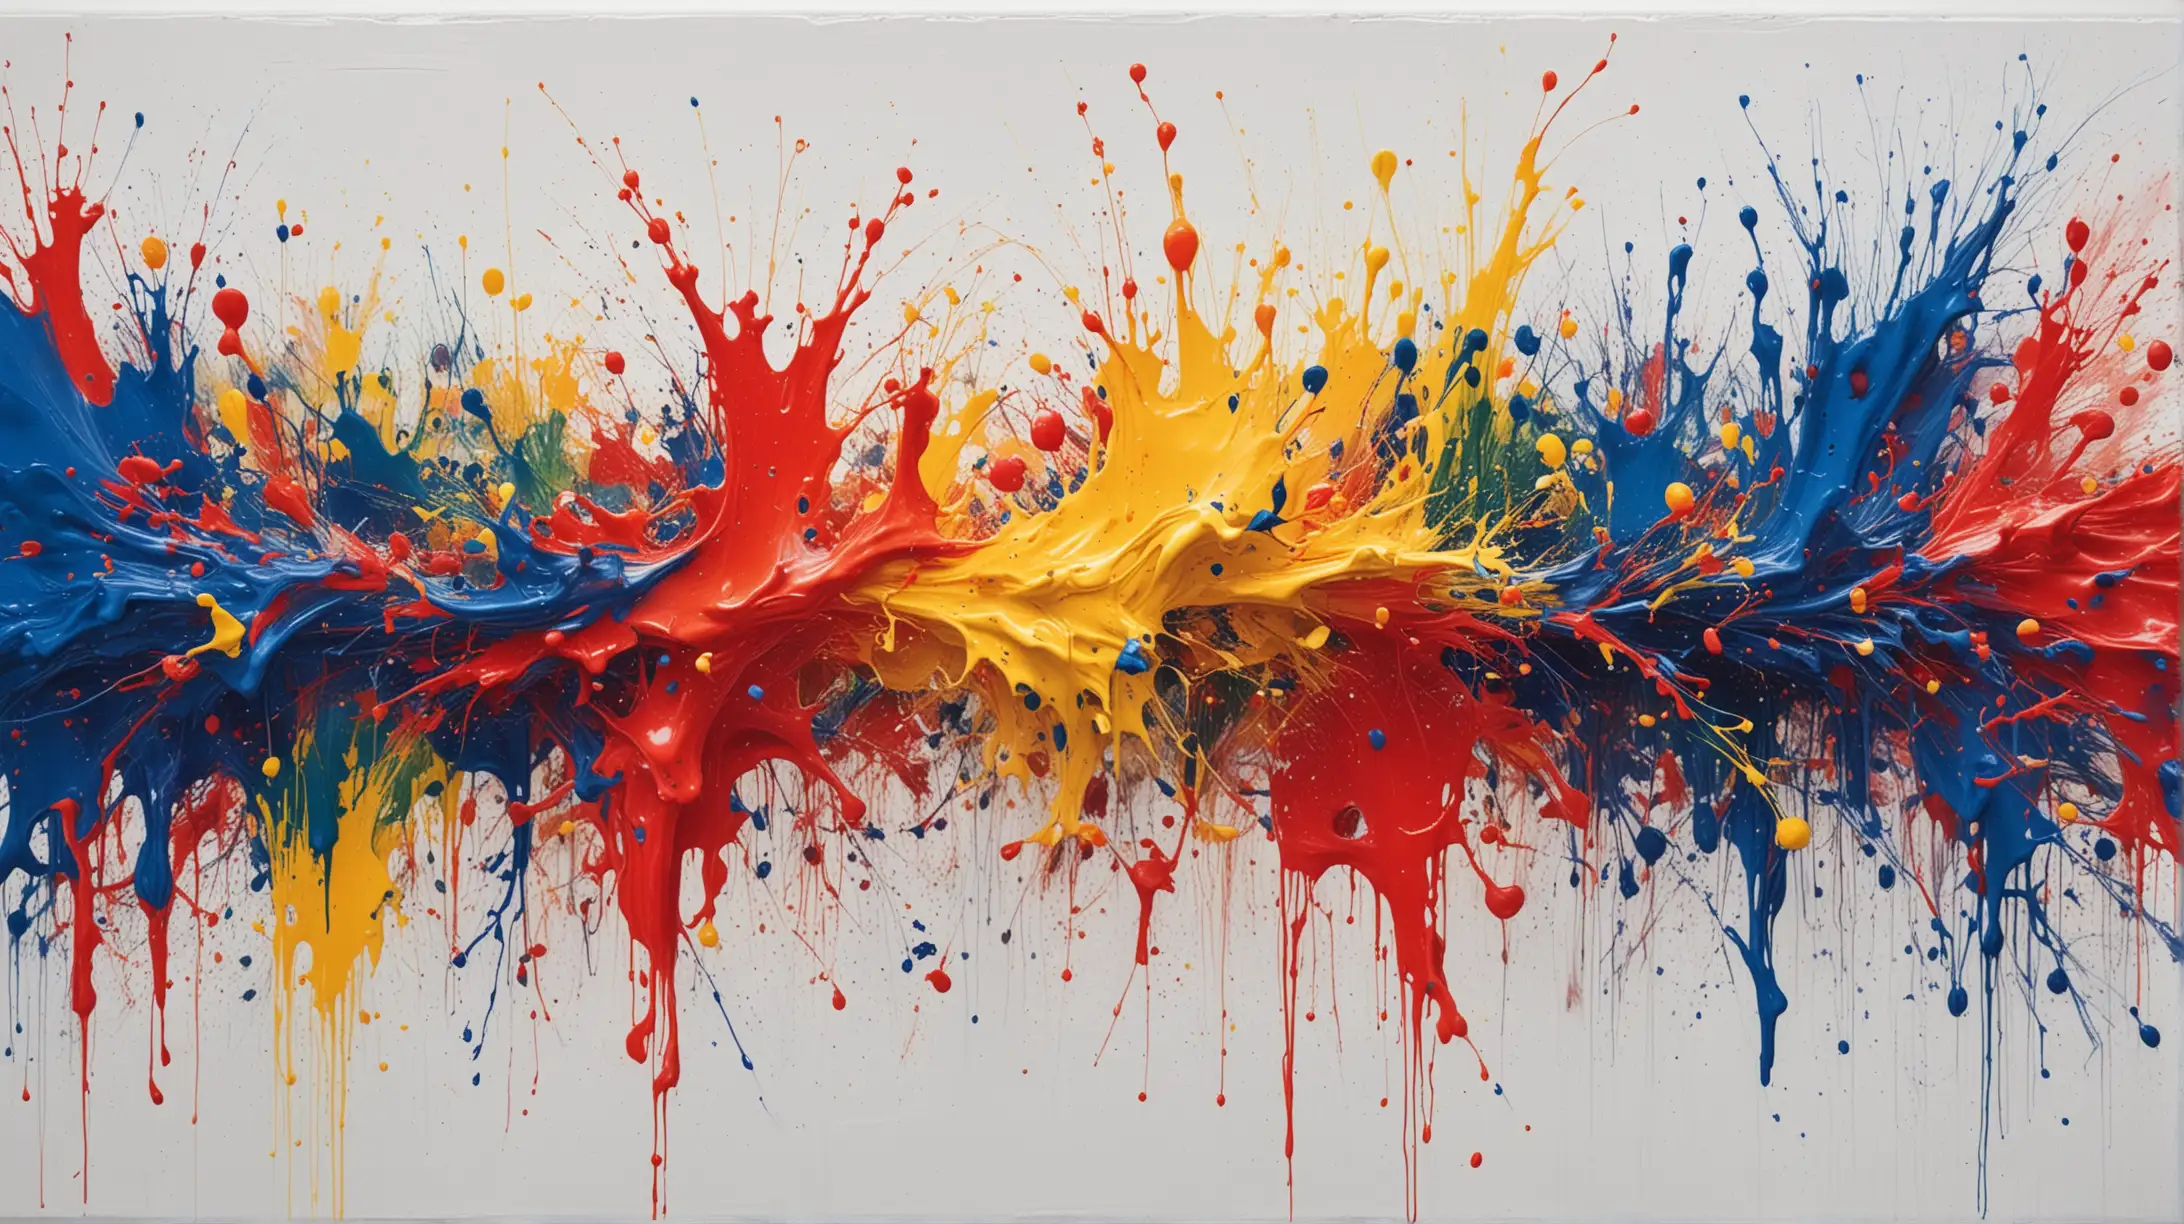 Vibrant Abstract Paint Splashes on White Canvas Inspired by Gerhard Richter